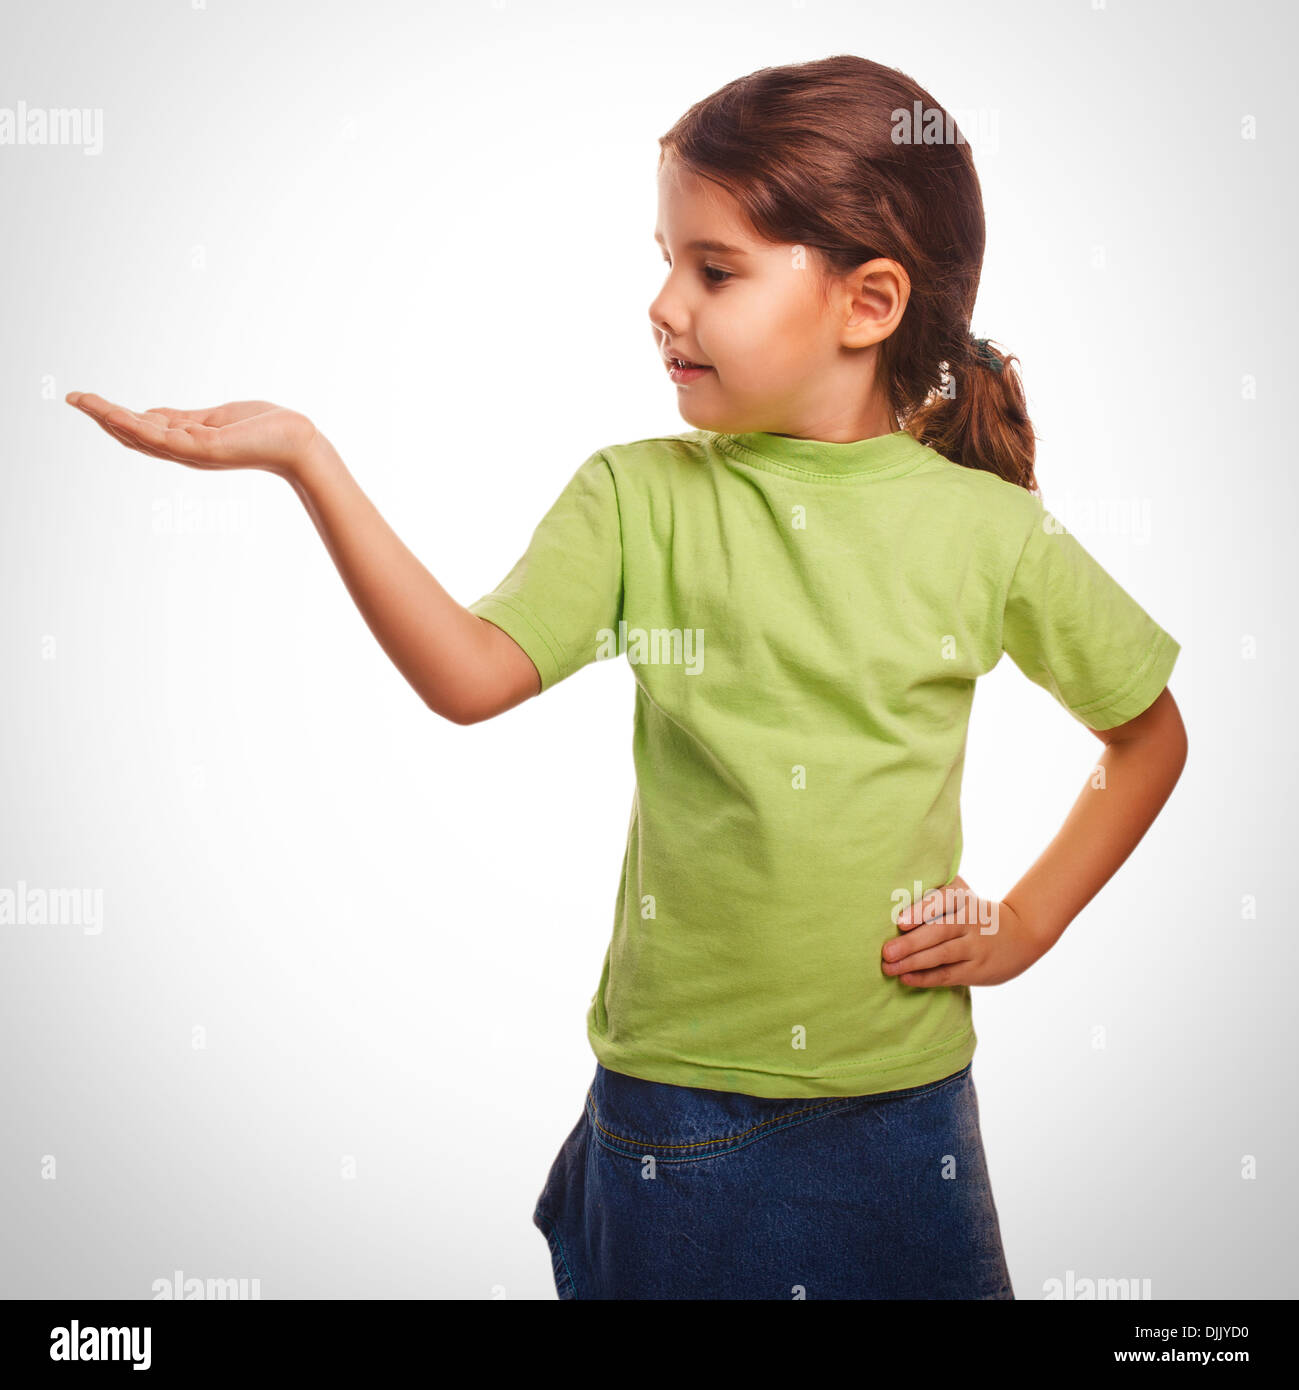 little girl holding open palm empty hand emotion Stock Photo